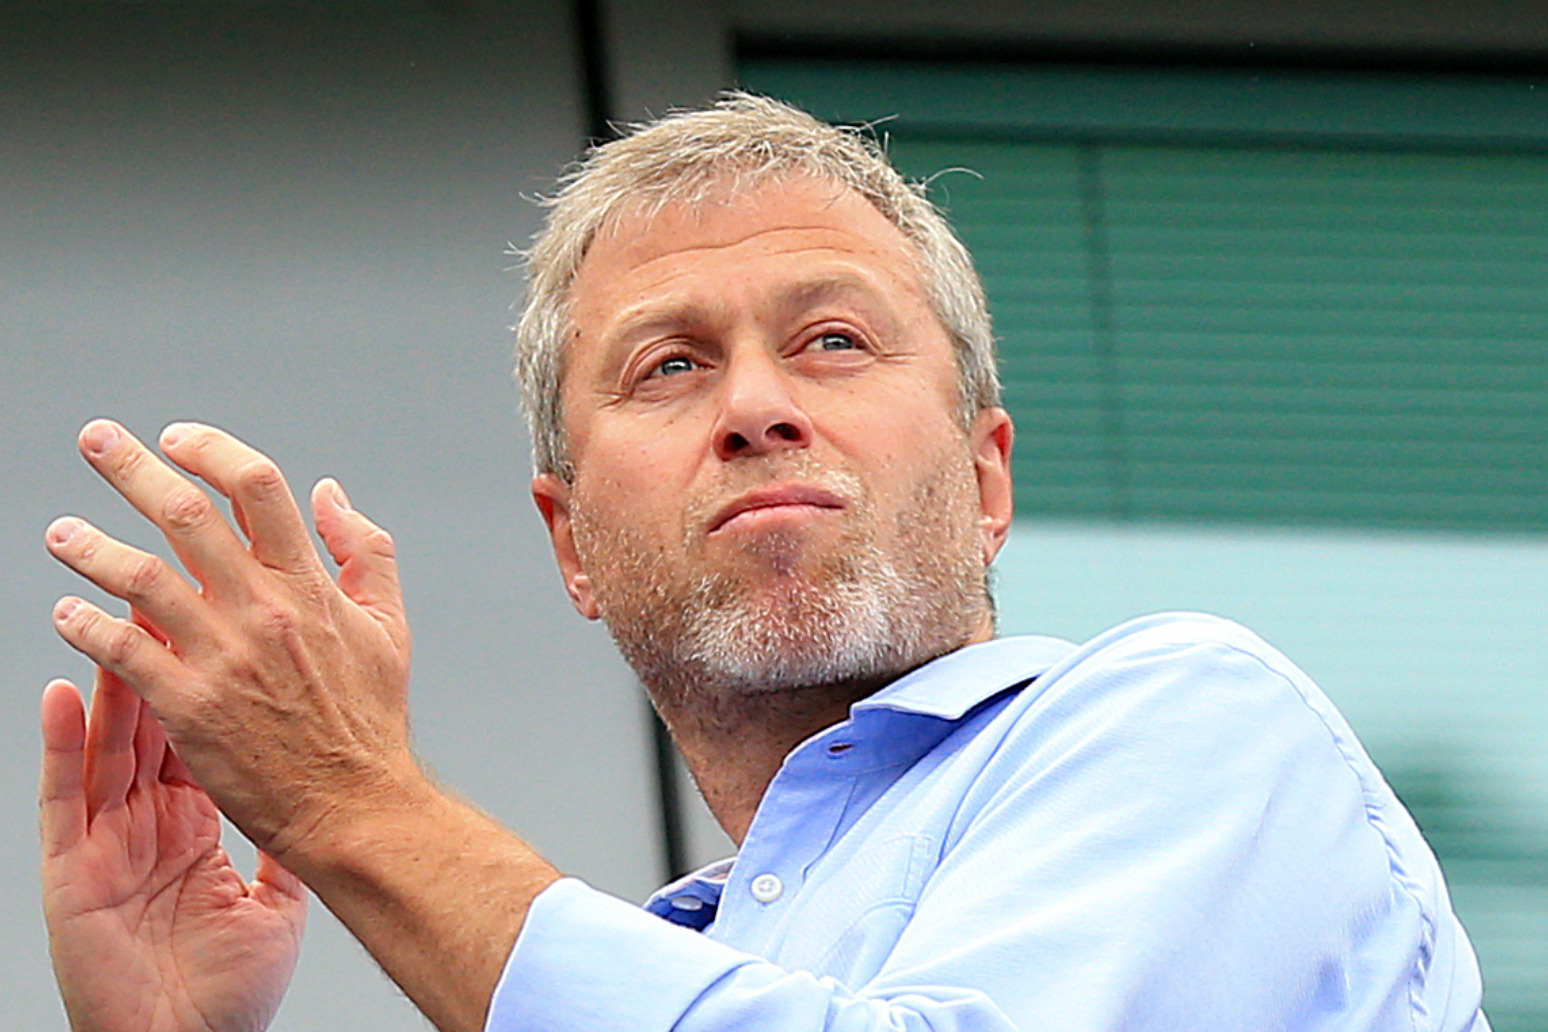 Claims that Abramovich bought Chelsea on Putin orders defamatory 